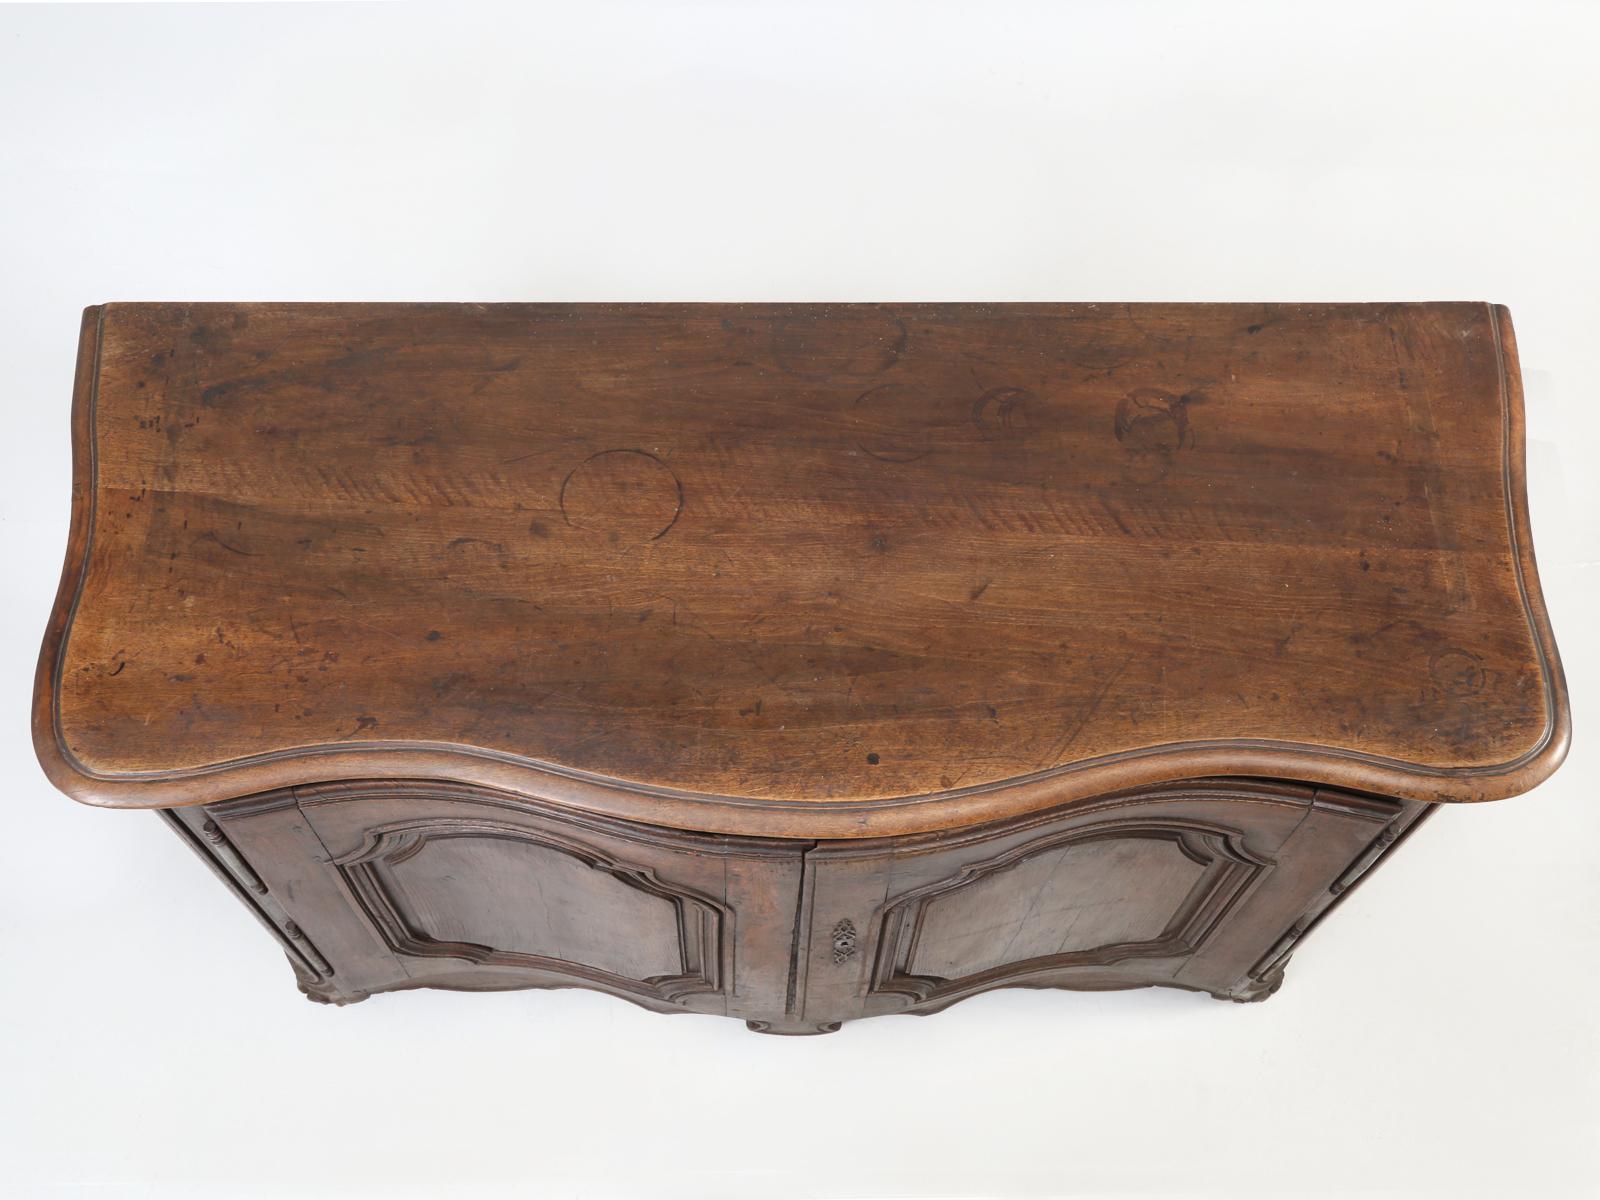 Country French Buffet, Serpentine Front and Completely Original, circa 1700s (Französisch)